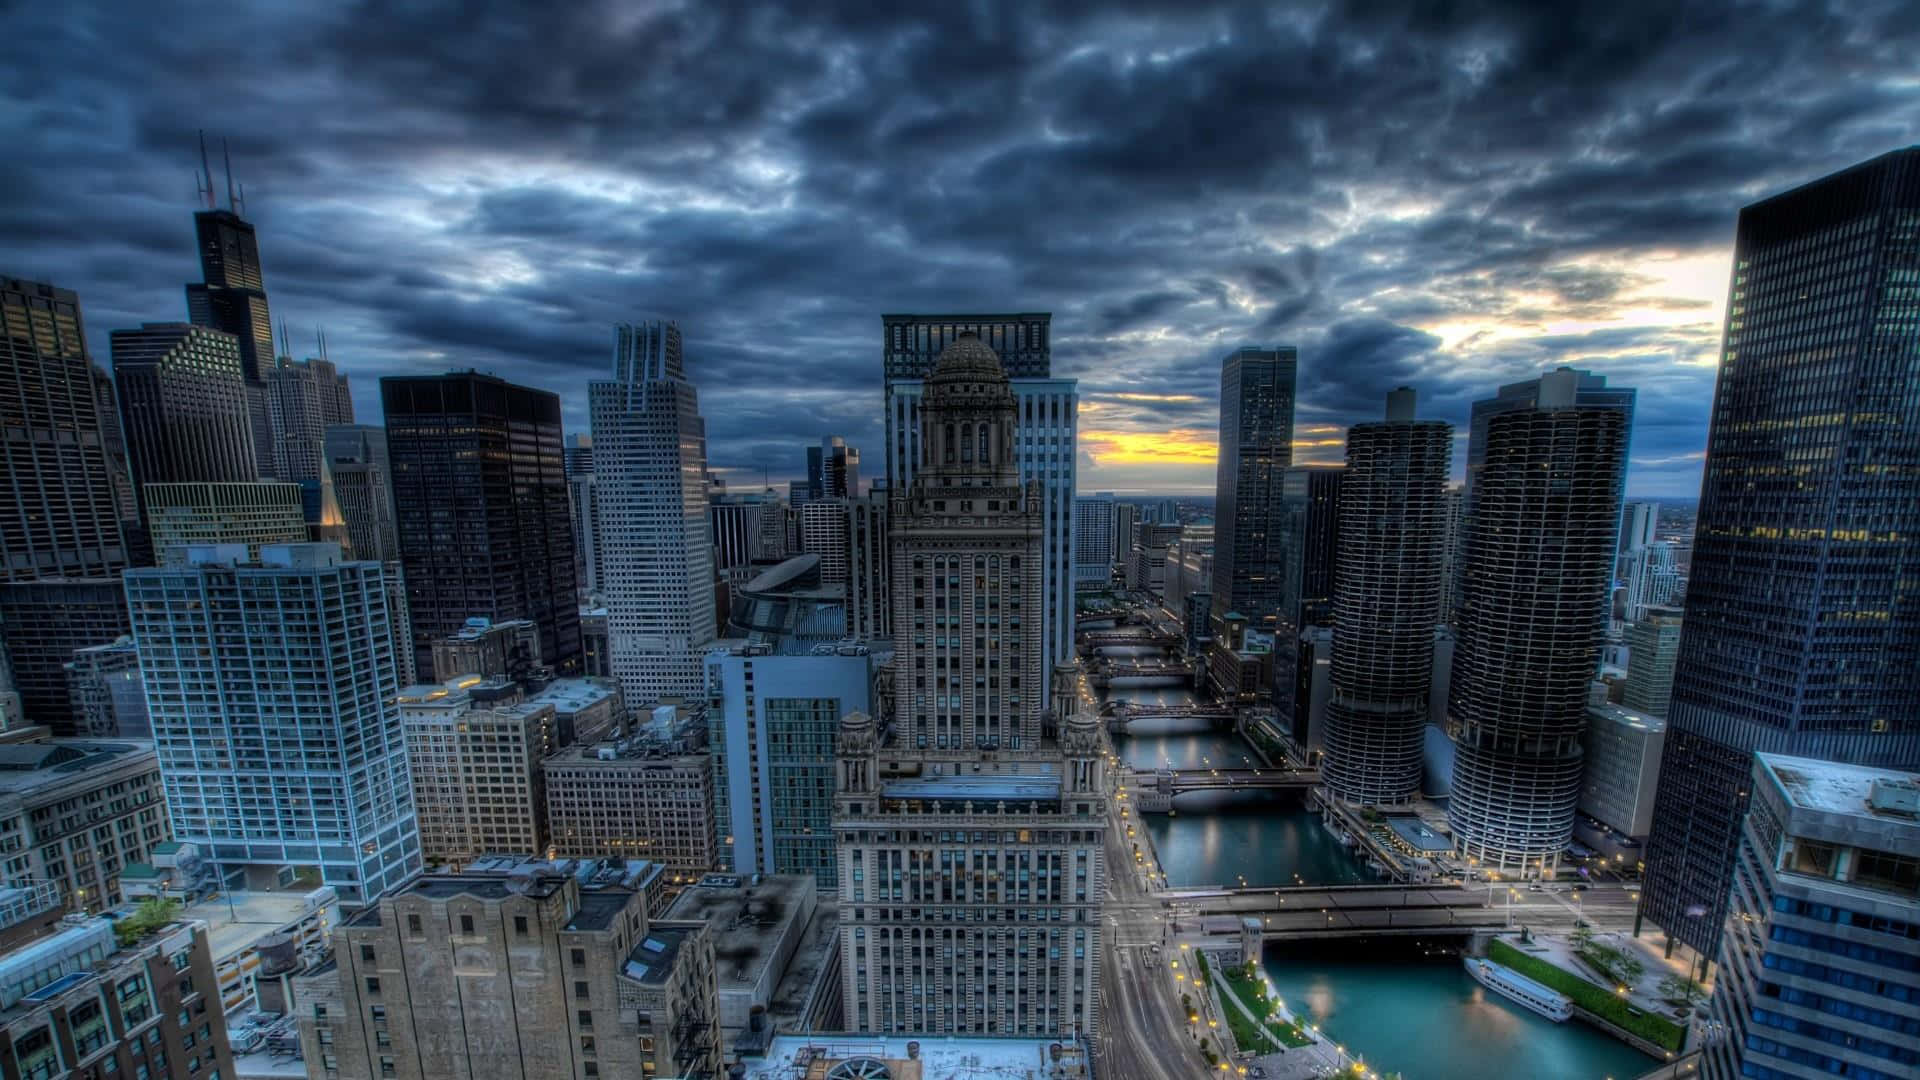 “The Magnificent Cloudline of Chicago's Skyline"